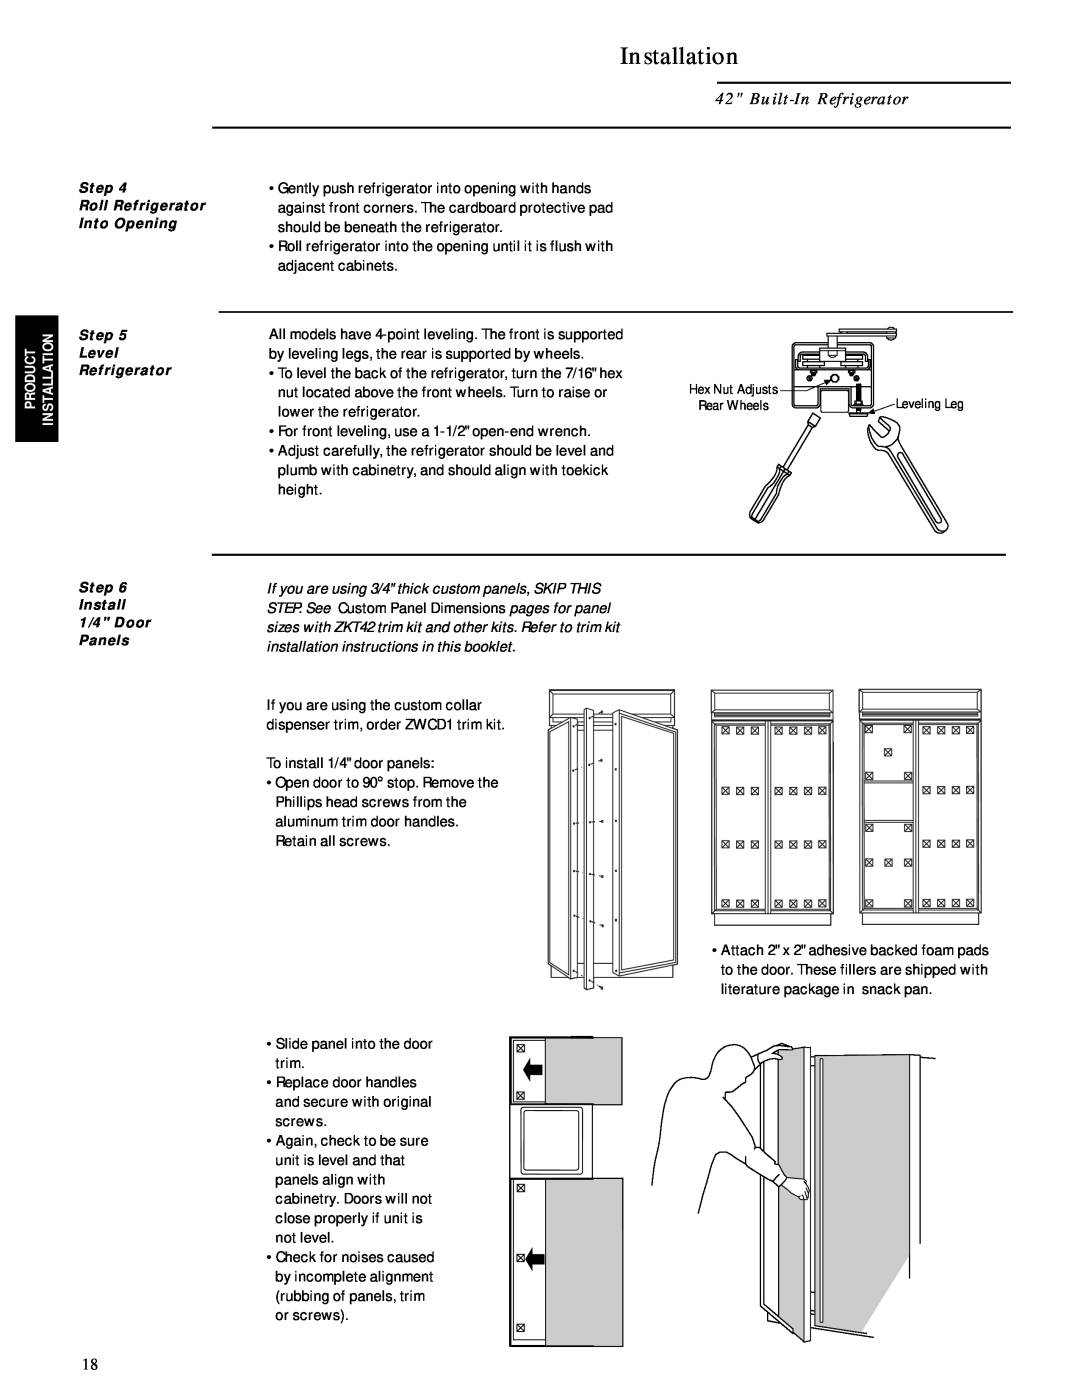 GE Monogram ZIS42N, ZISB42D, ZISW42D Installation, Built-In Refrigerator, For front leveling, use a 1-1/2 open-end wrench 